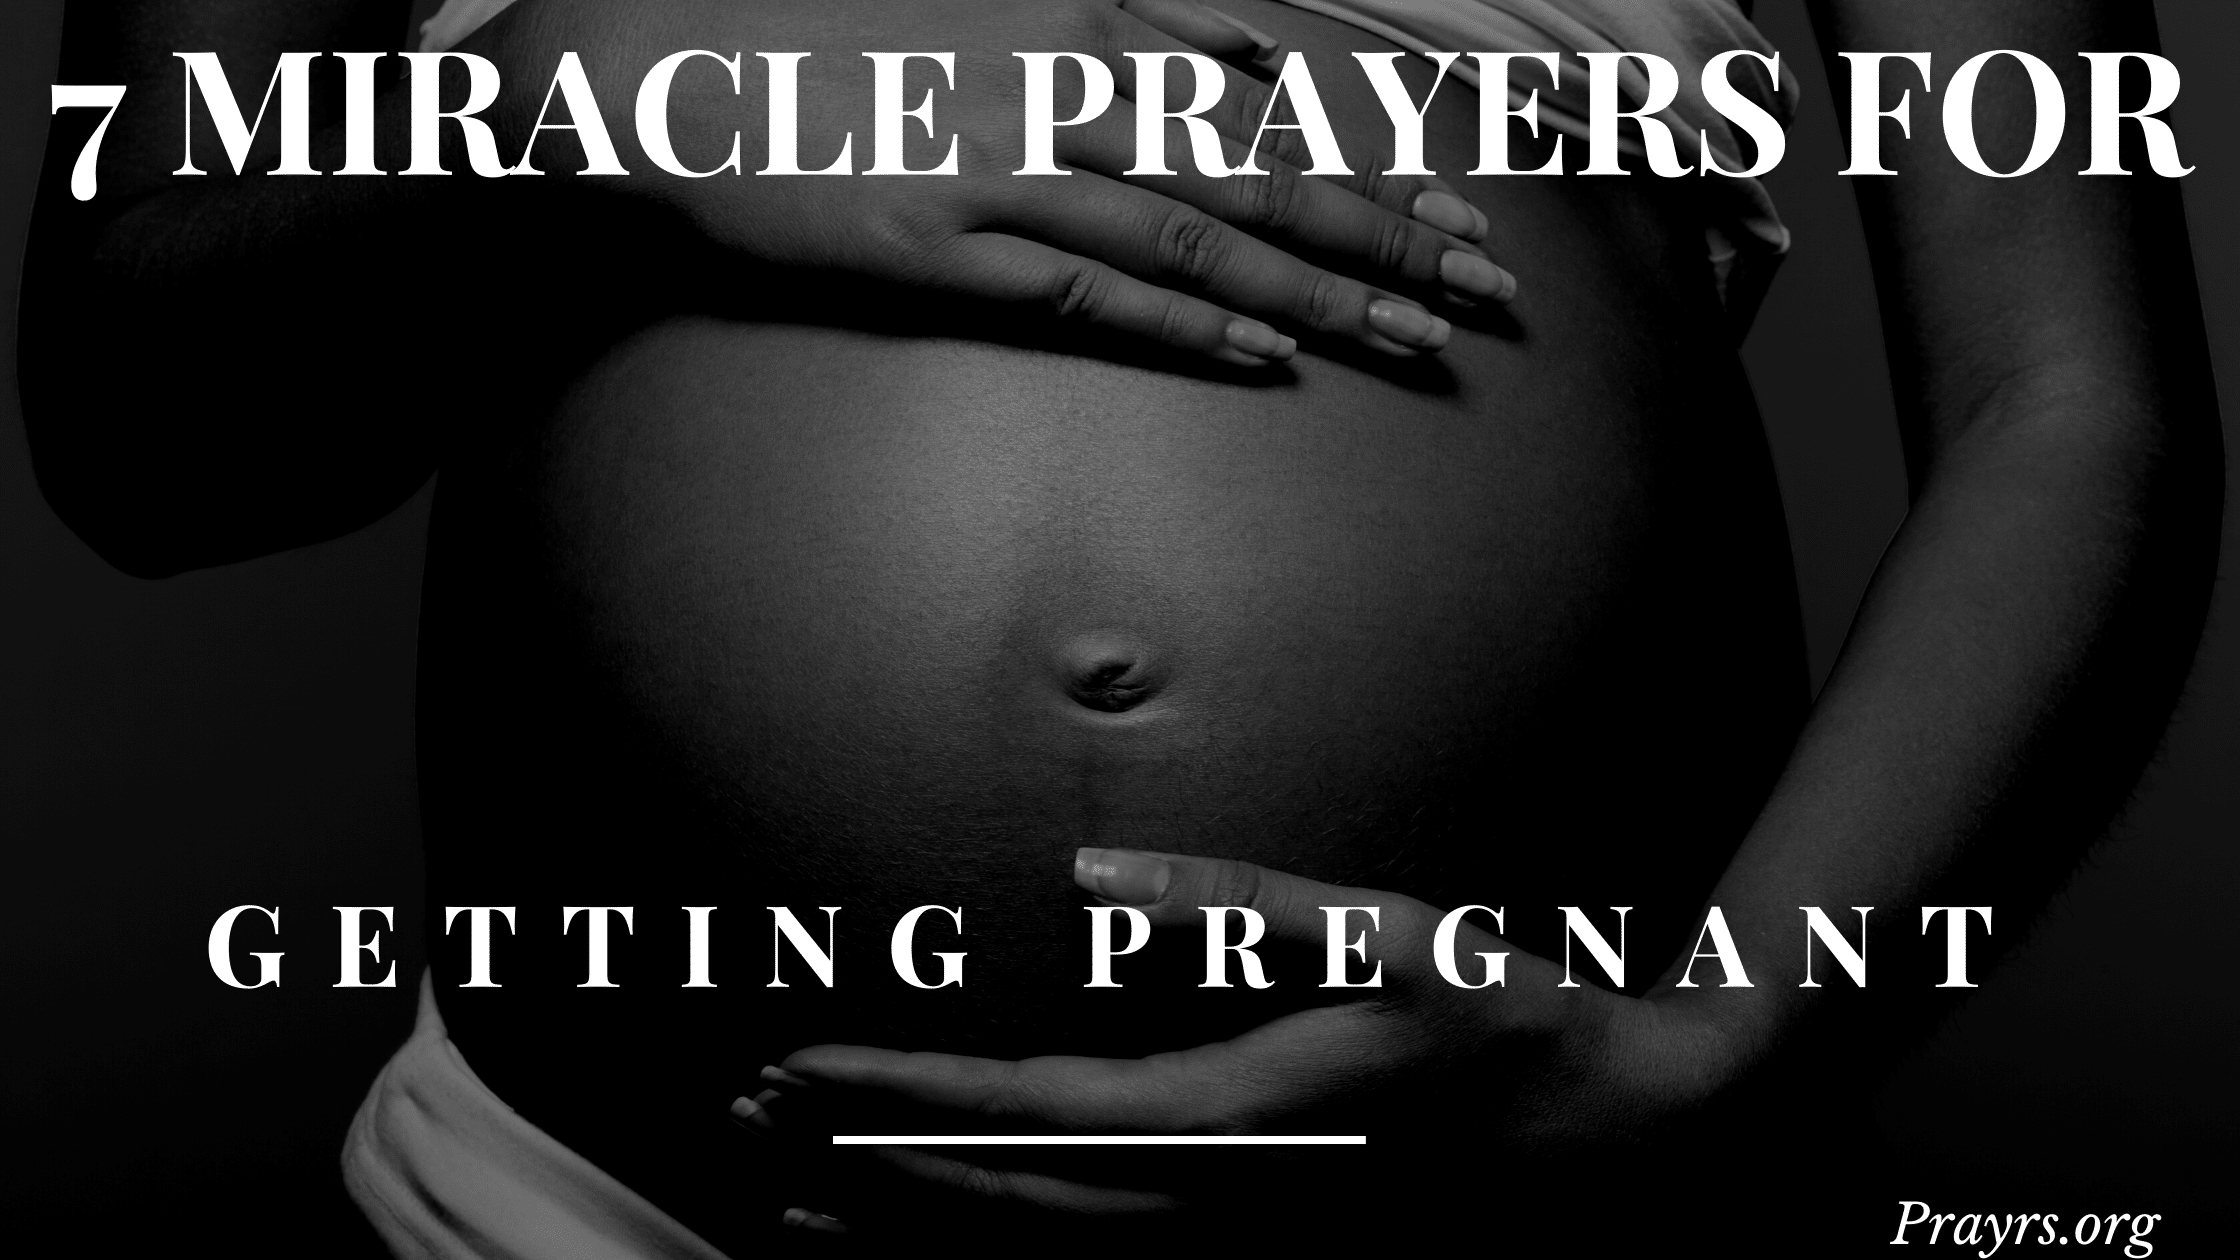 7 Miracle Prayers for Getting Pregnant